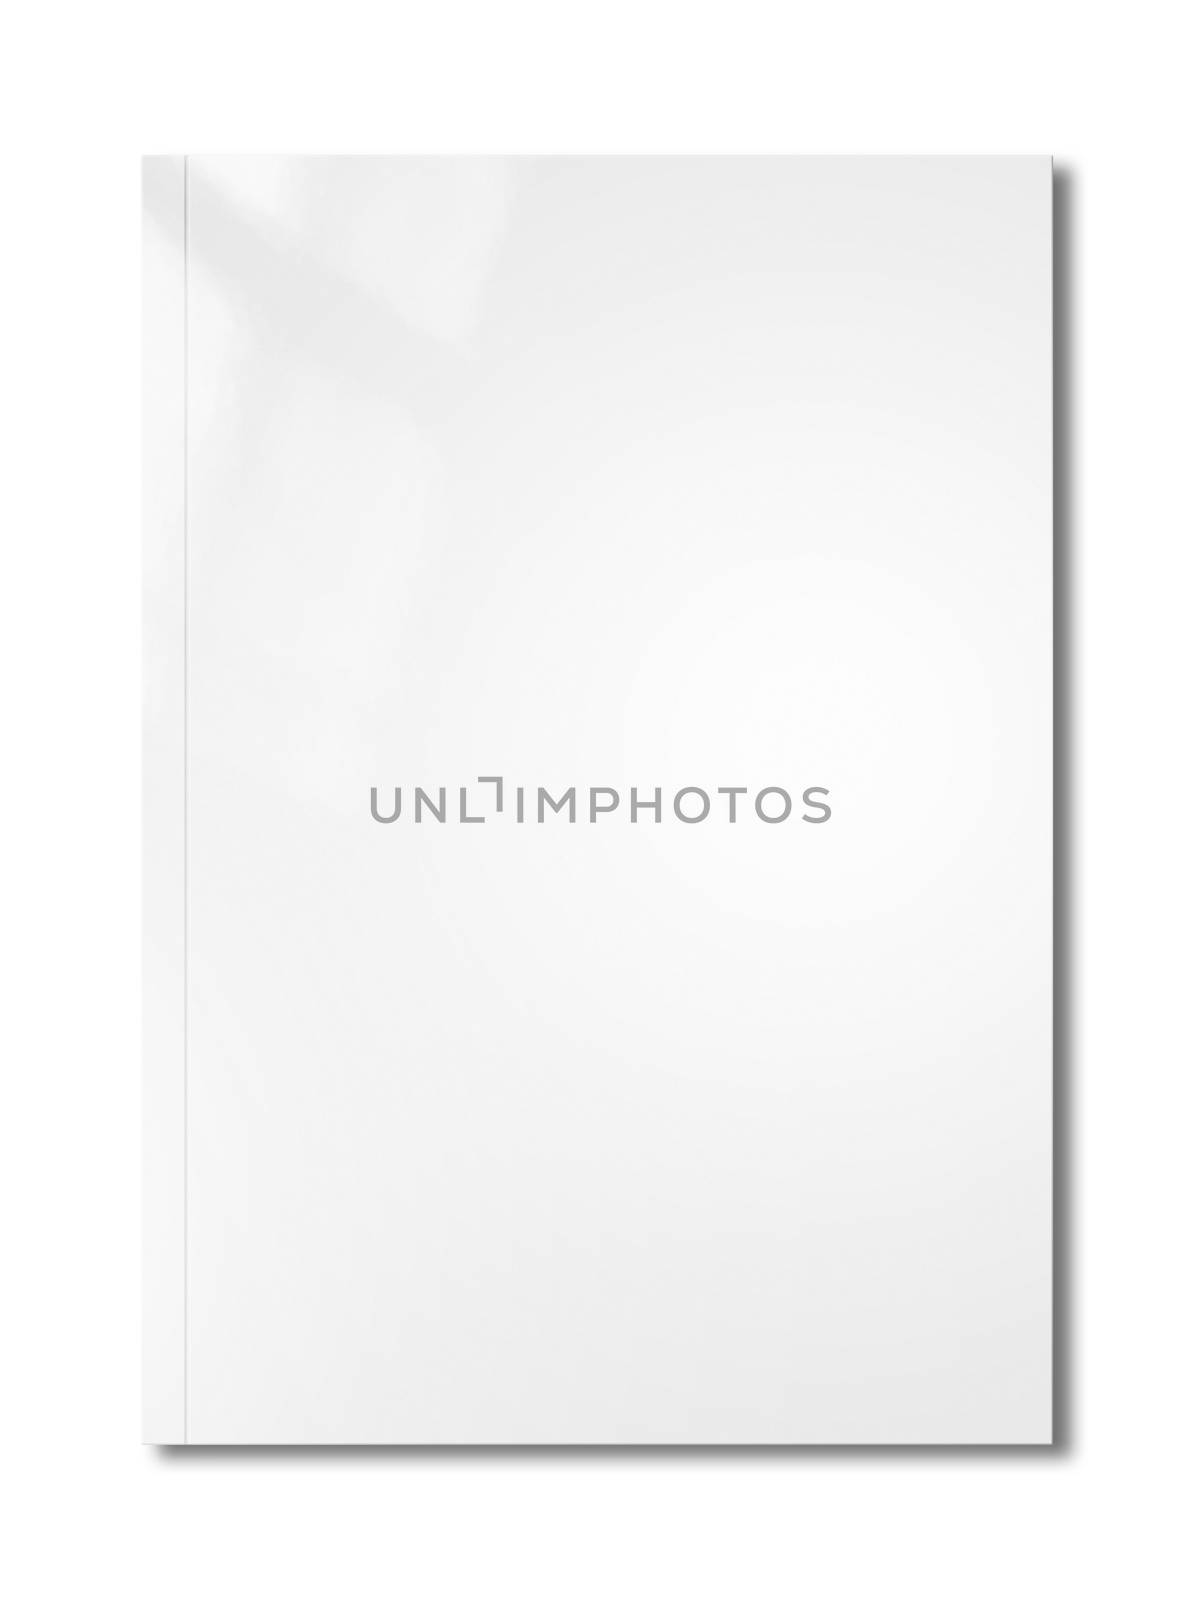 White booklet cover isolated on blank background, mockup template